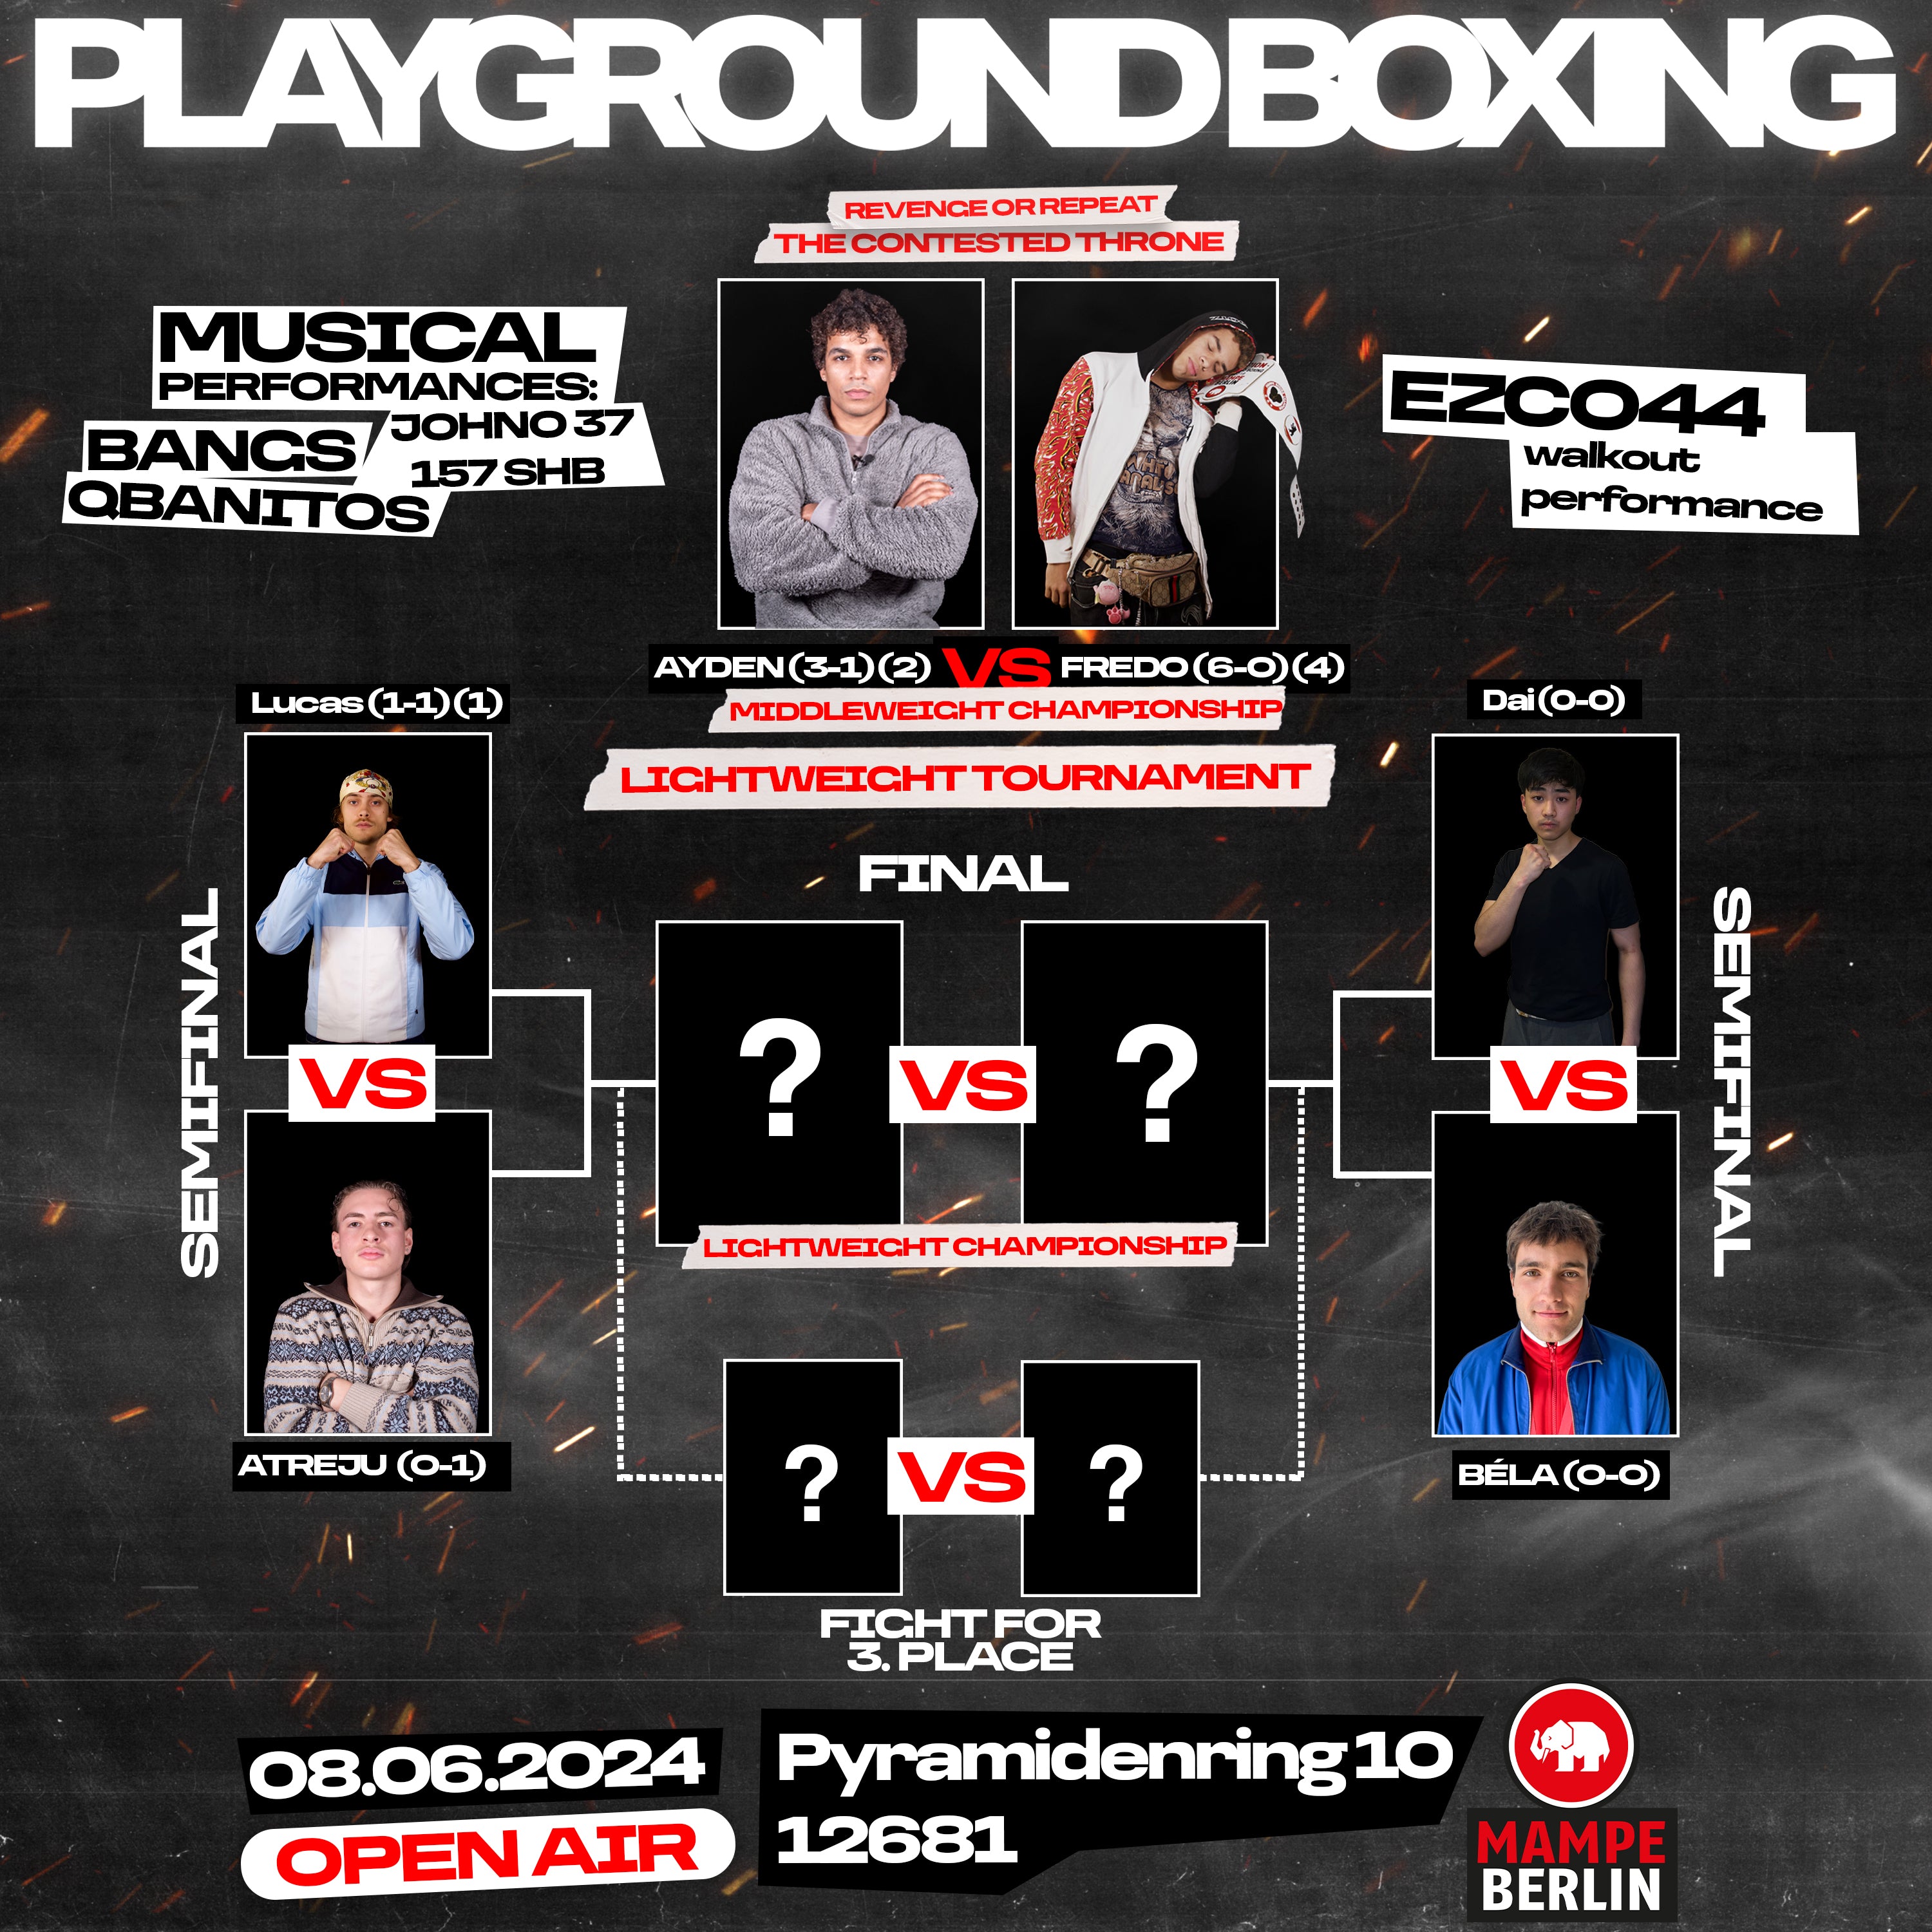 DRINK THE FIGHT - Playground Boxing: Homecoming an den Pyramidenring